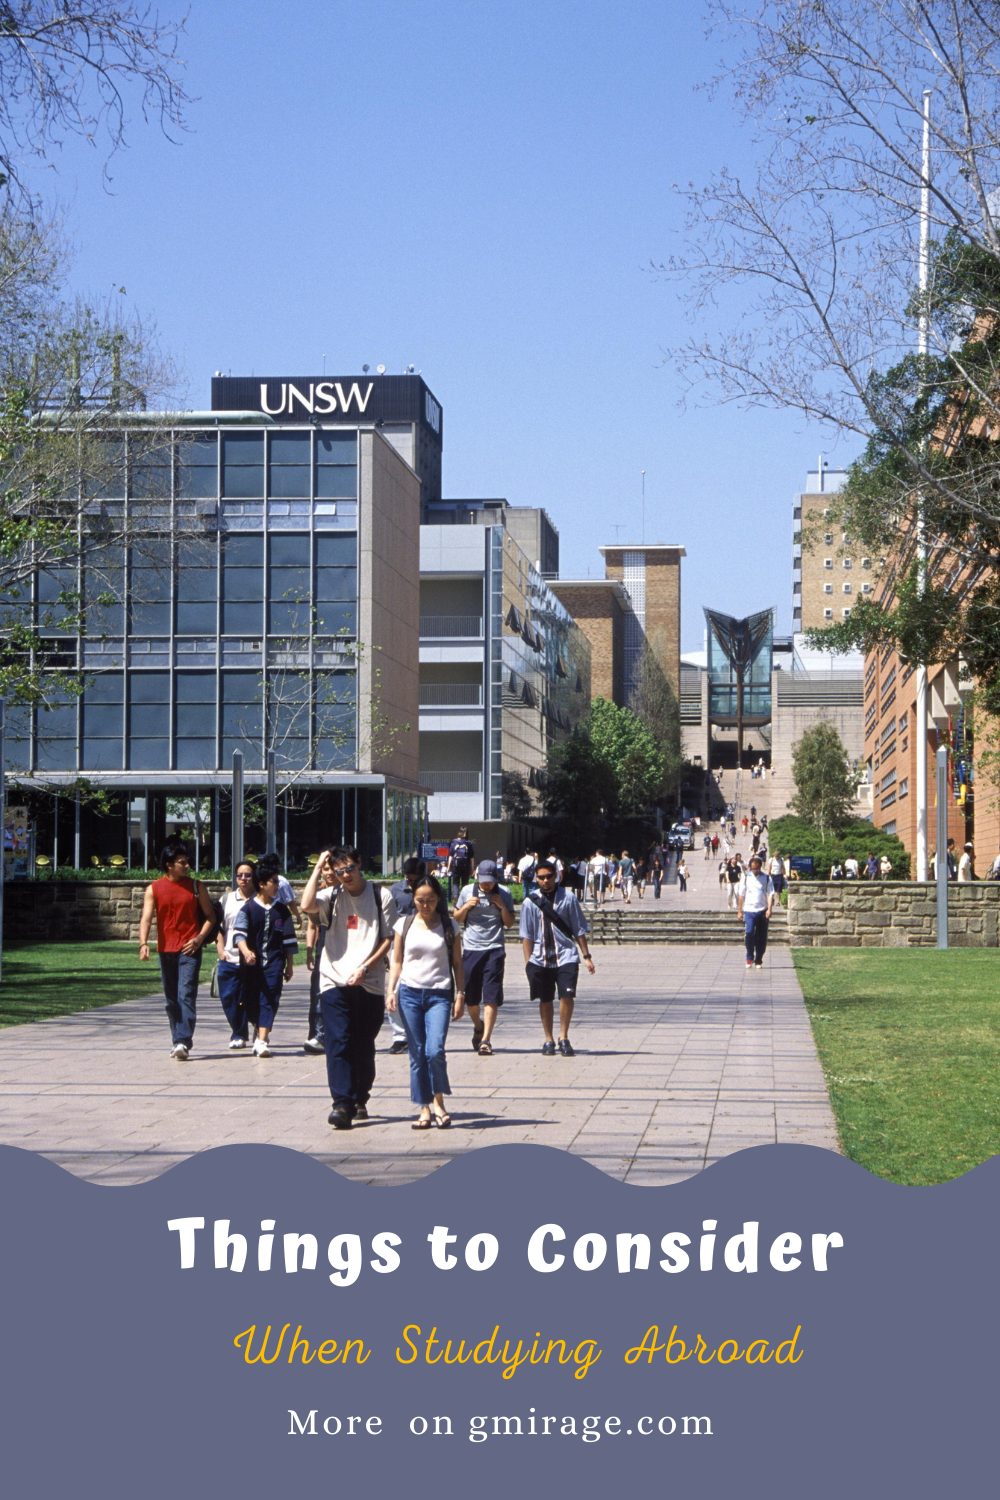 Things to Consider When Studying Abroad